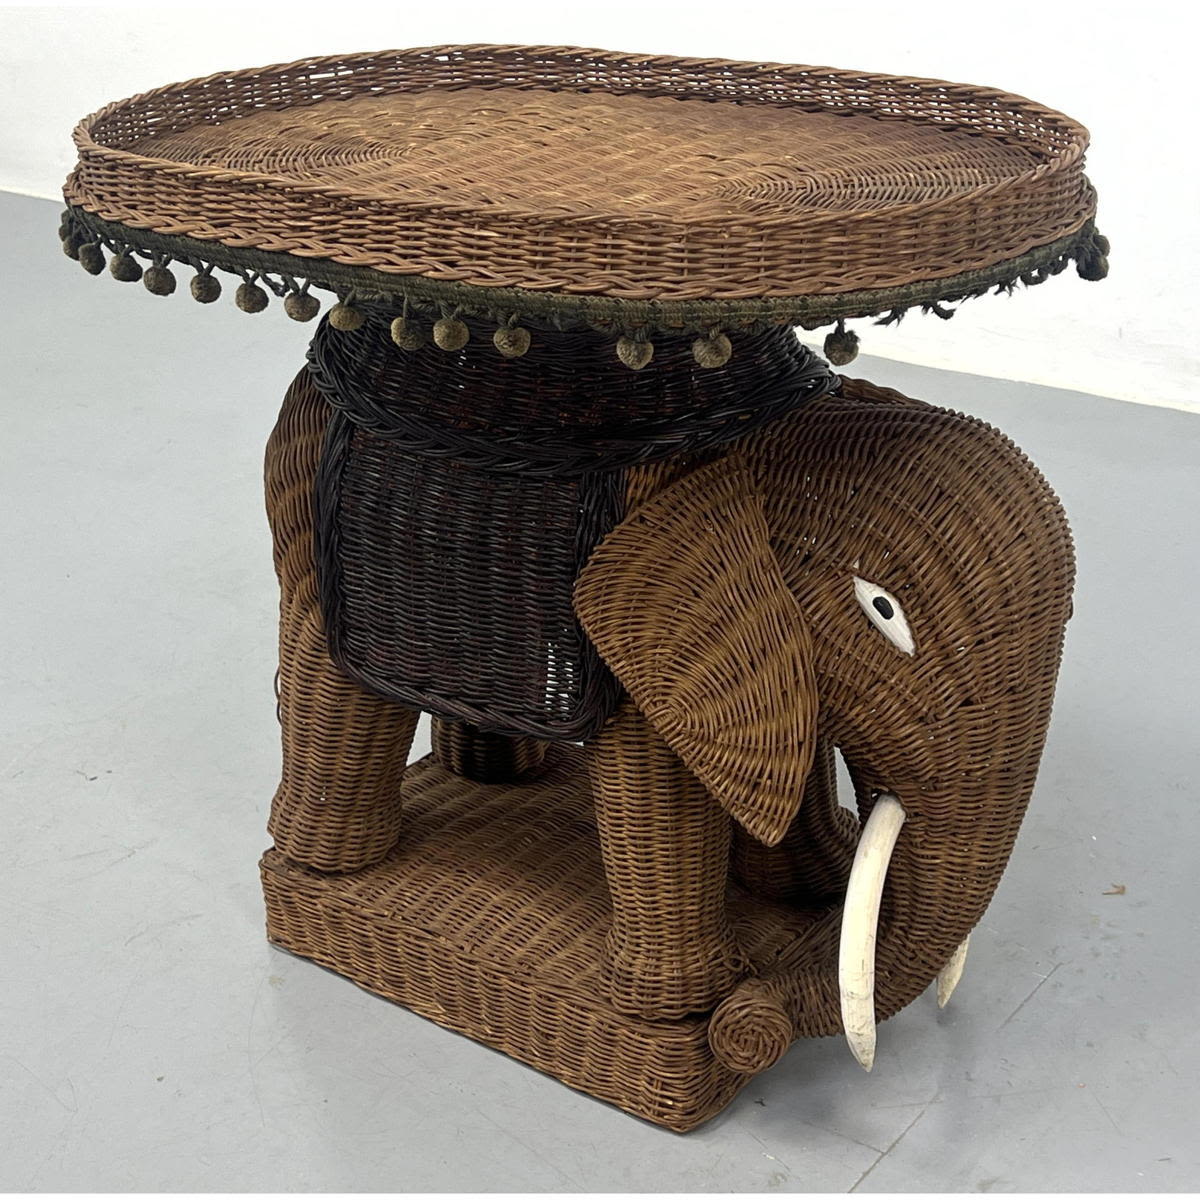 Woven Wicker Figural Elephant Stand 3ad651